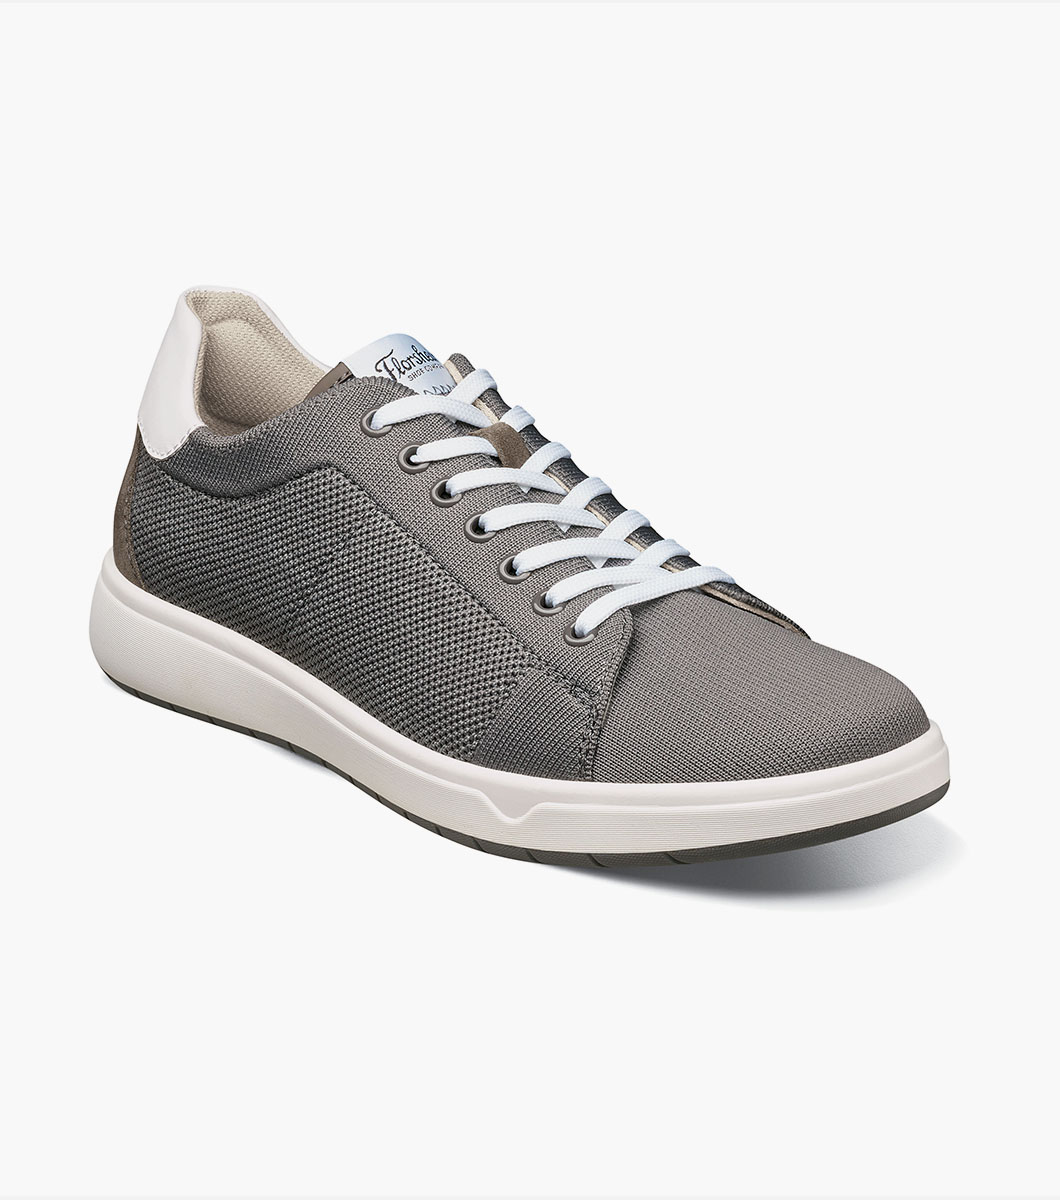 Heist Knit Lace To Toe Sneaker All Mens Shoes | Florsheim.com